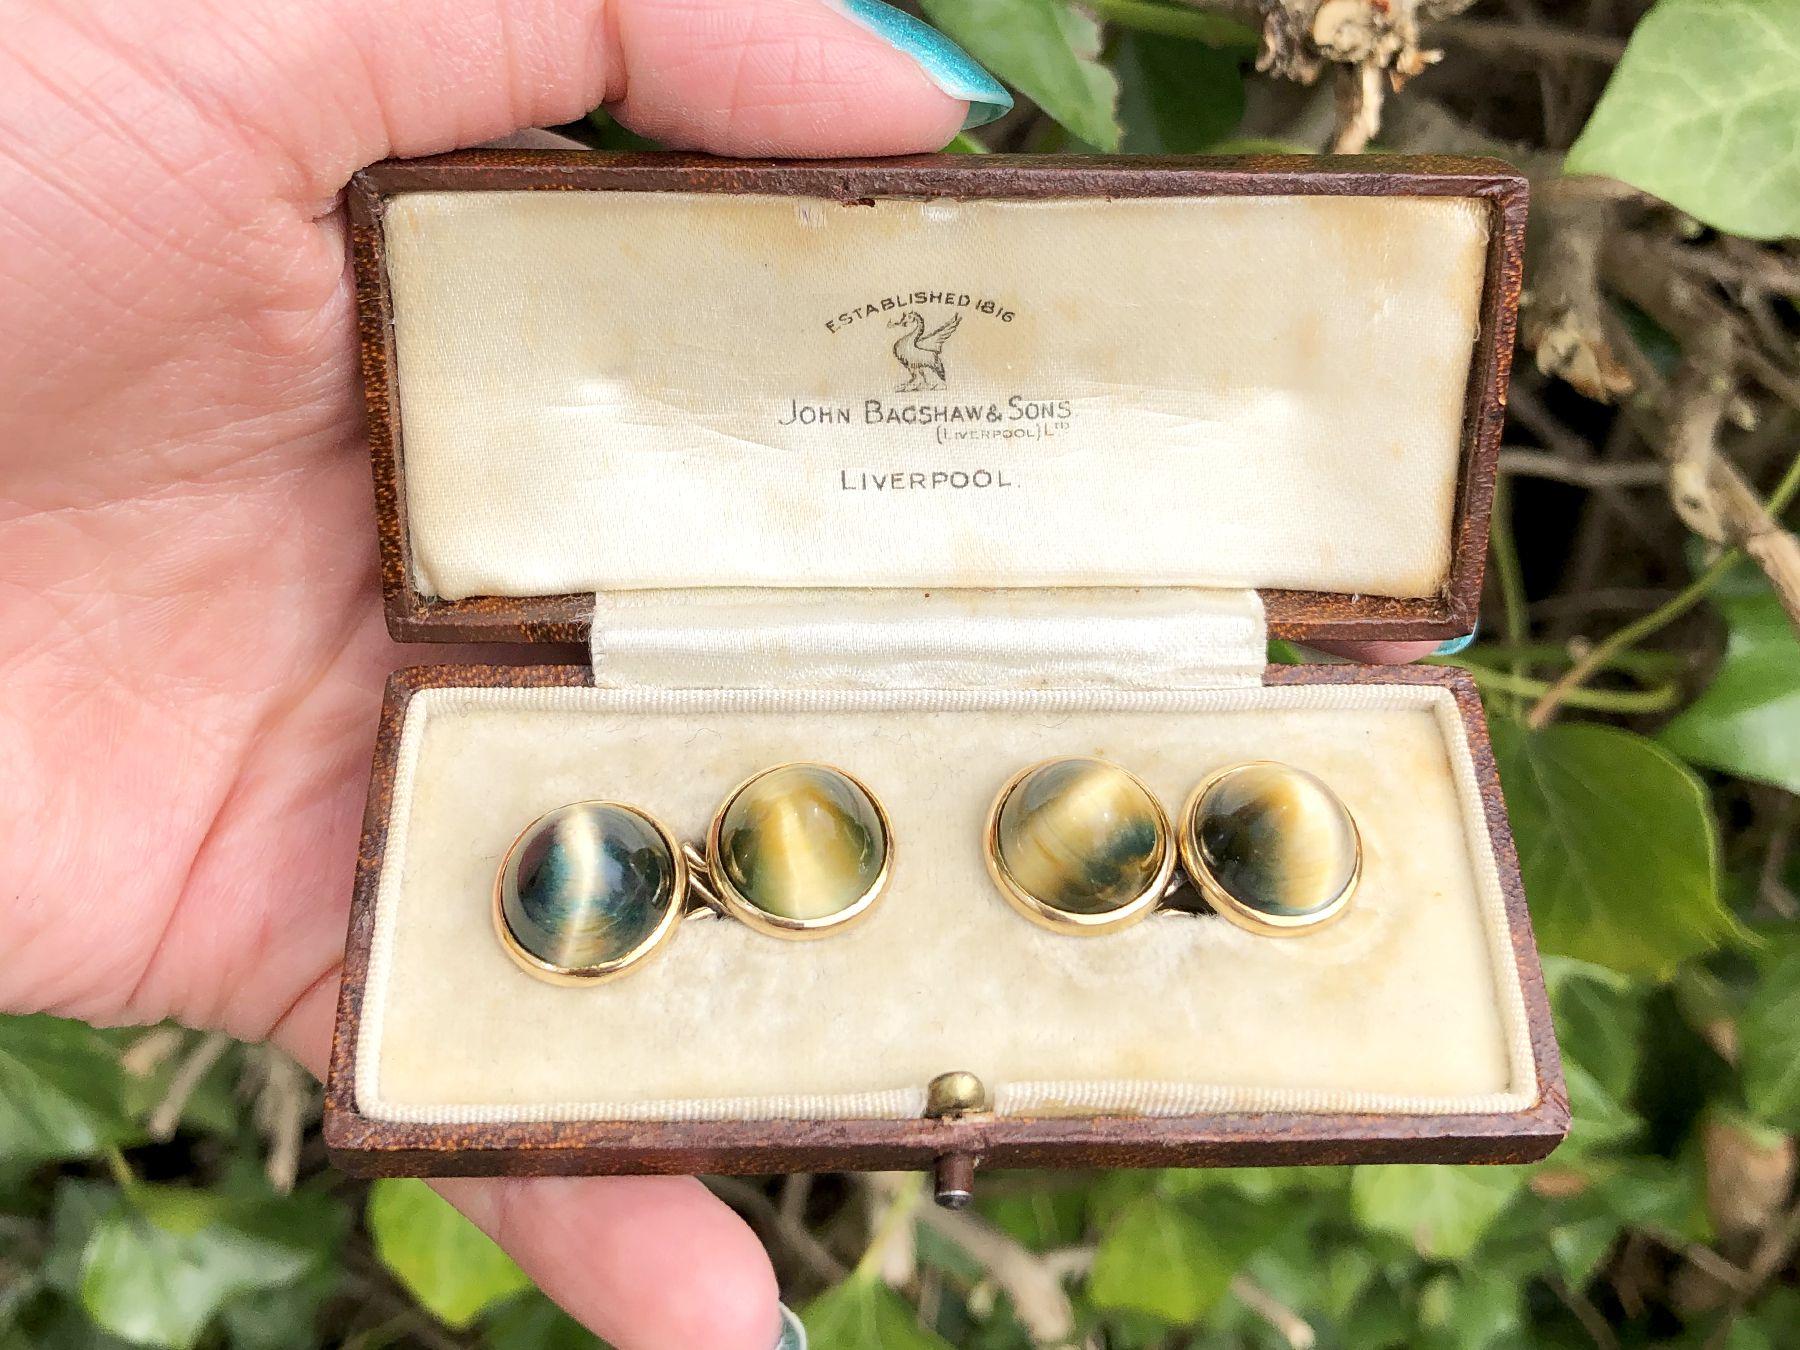 A fine and impressive pair of antique 18.20 carat tigers eye and 18 carat yellow gold cufflinks - boxed; an addition to our mens jewelry and estate jewelry collections

These fine impressive antique cufflinks have been crafted in 18k yellow